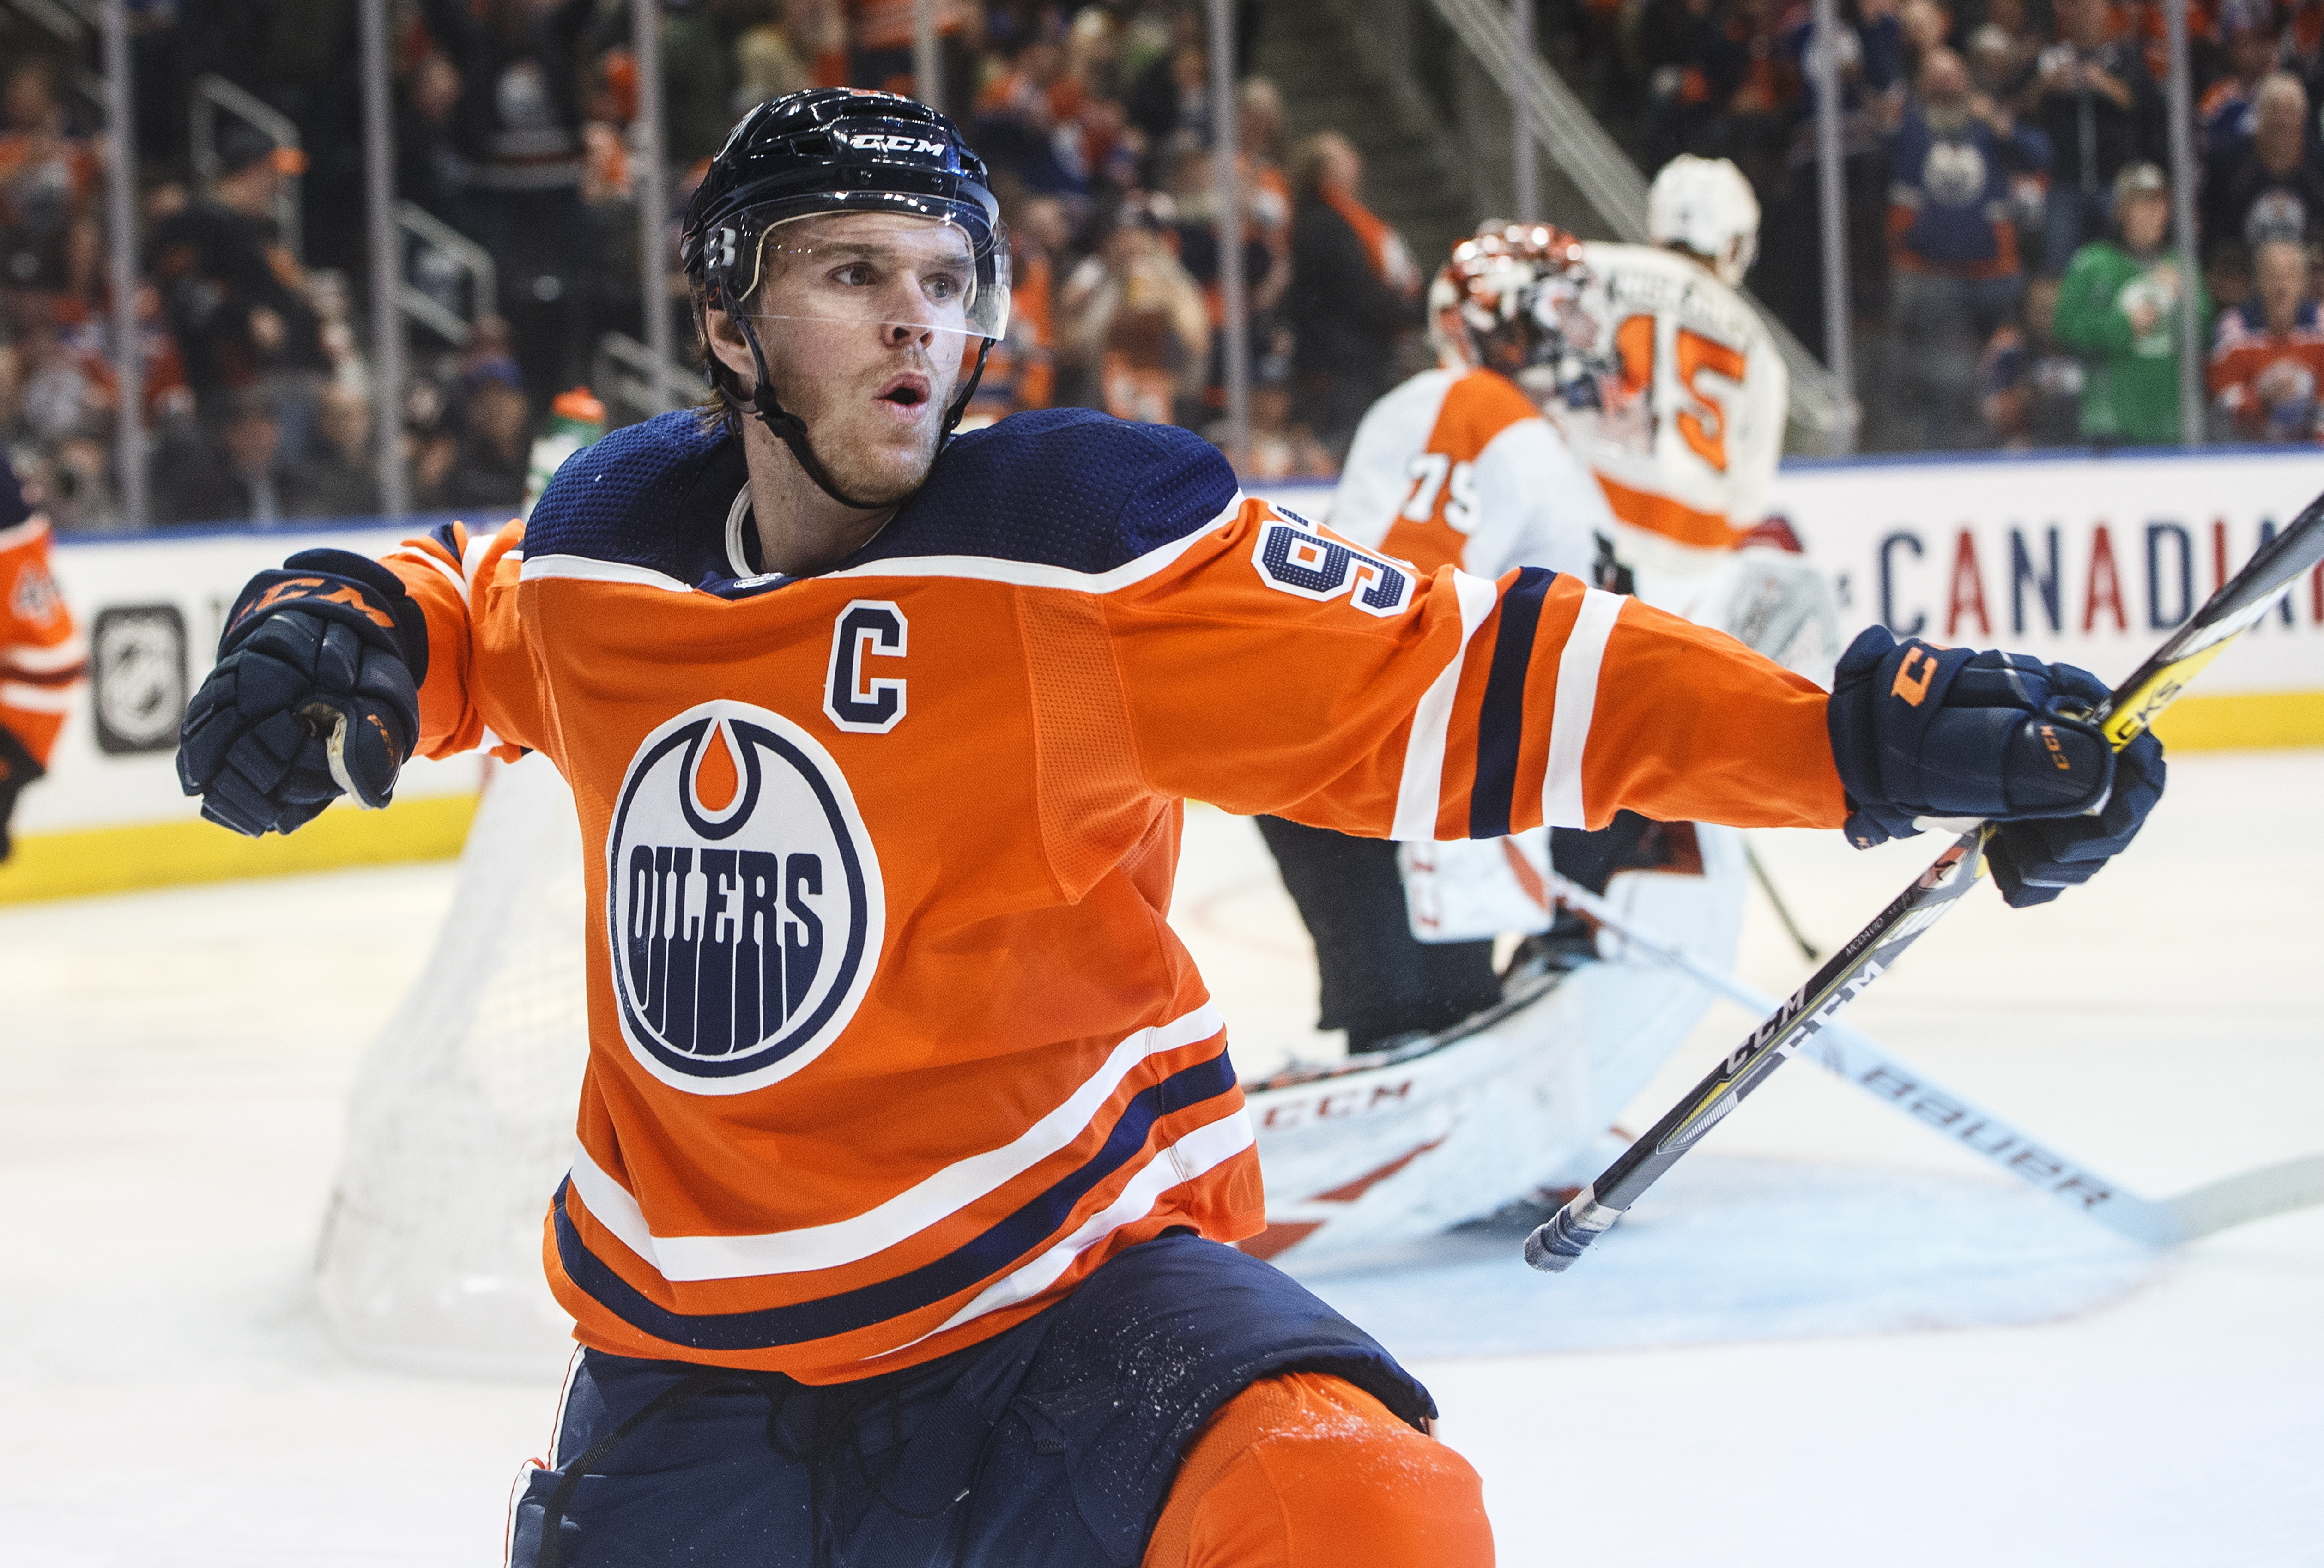 McDavid (5 points) and Draisaitl lead Oilers over Flyers 6-3